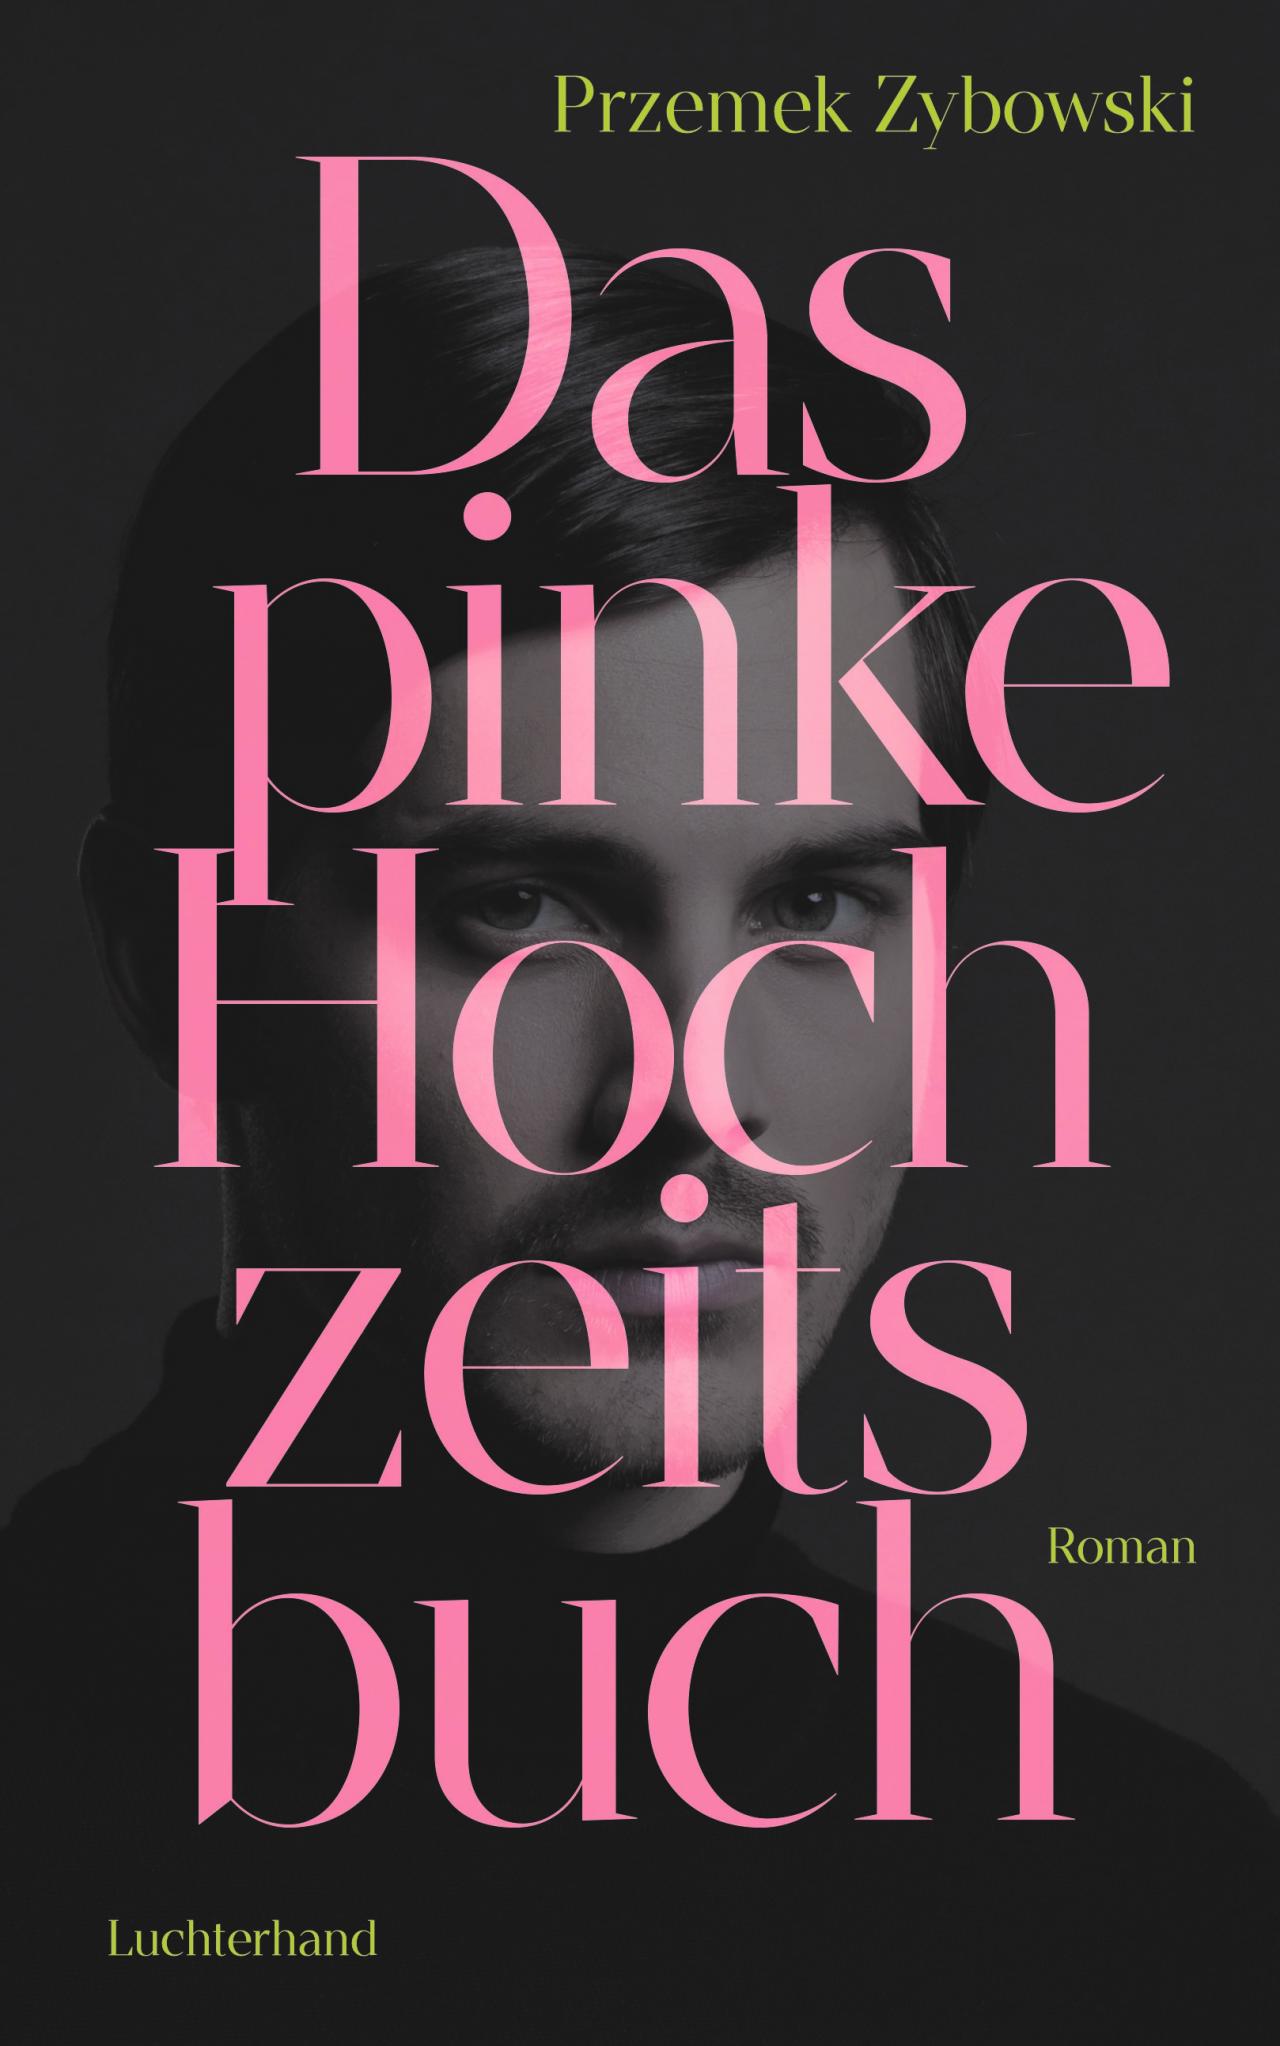 You can see the book cover of Das pinke Hochzeitsbuch